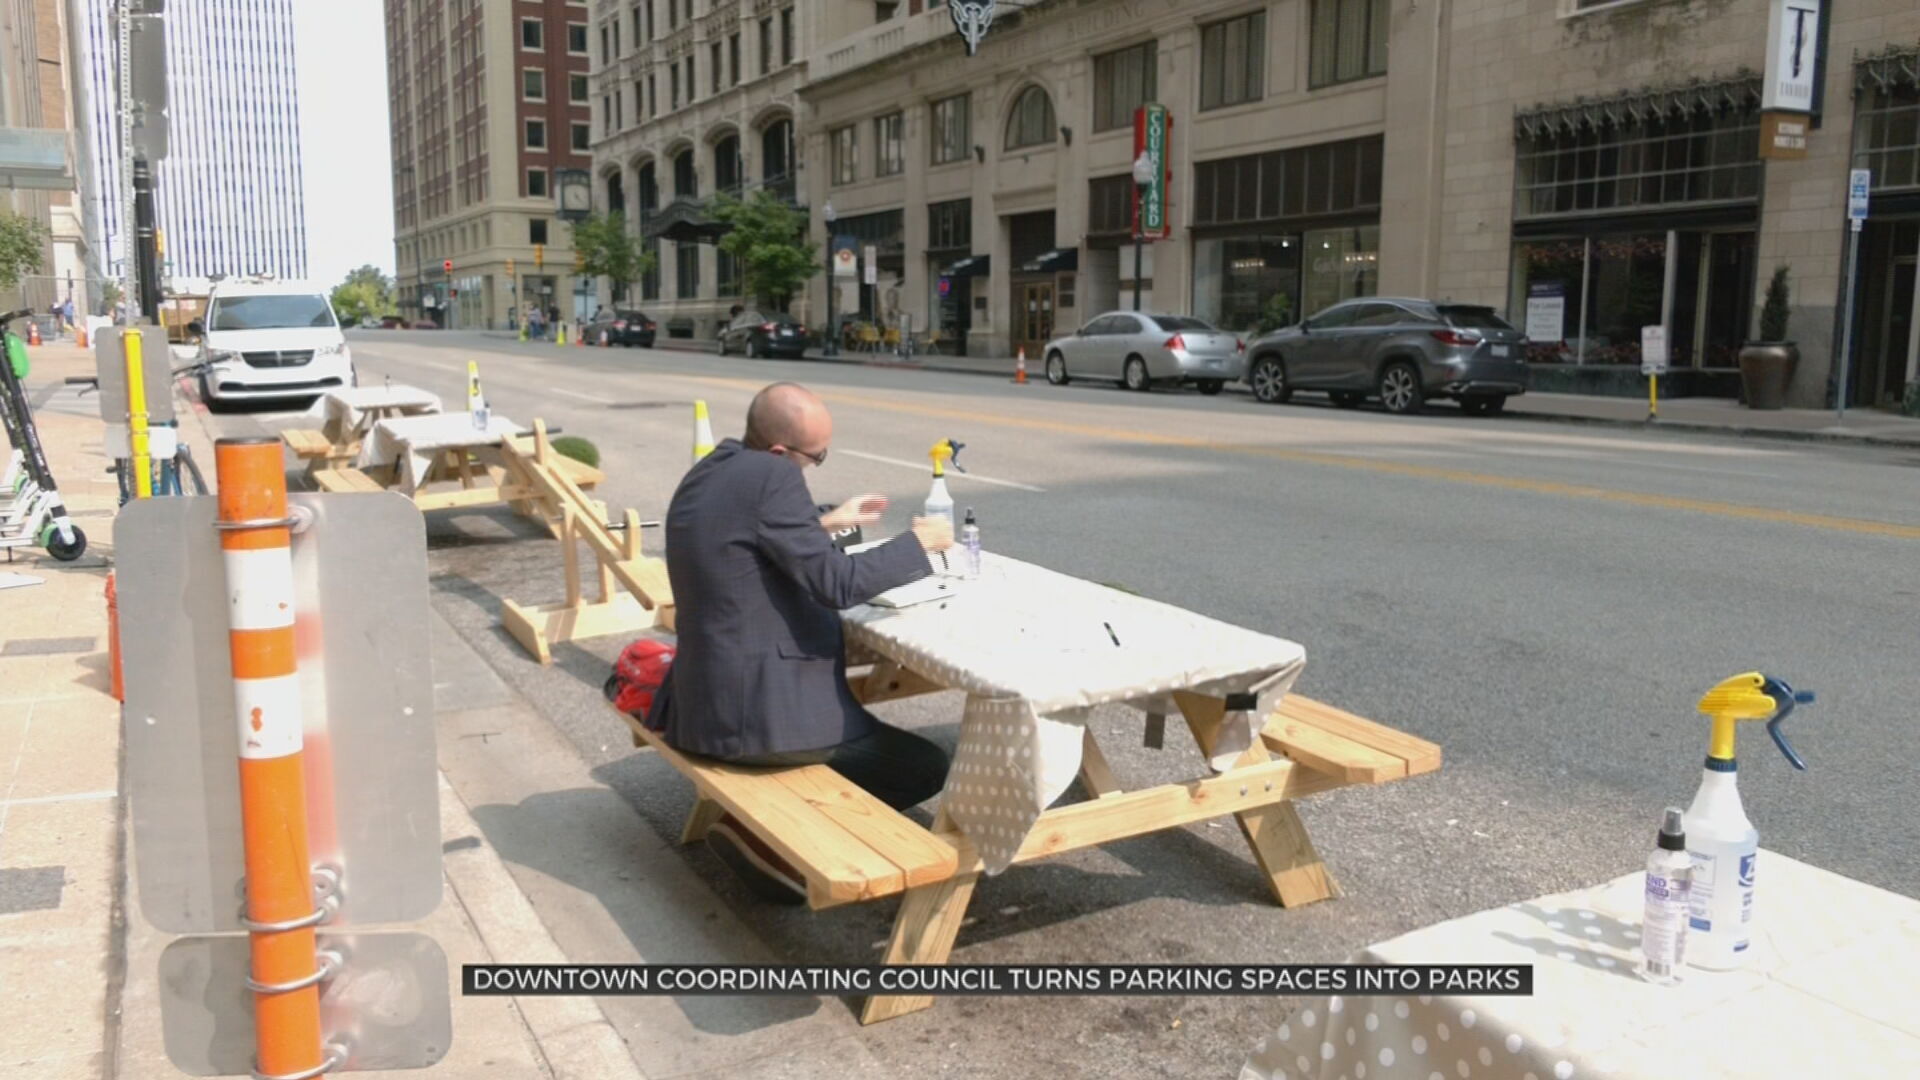 Tulsa Downtown Coordinating Council Turns Parking Spots Into Parks 